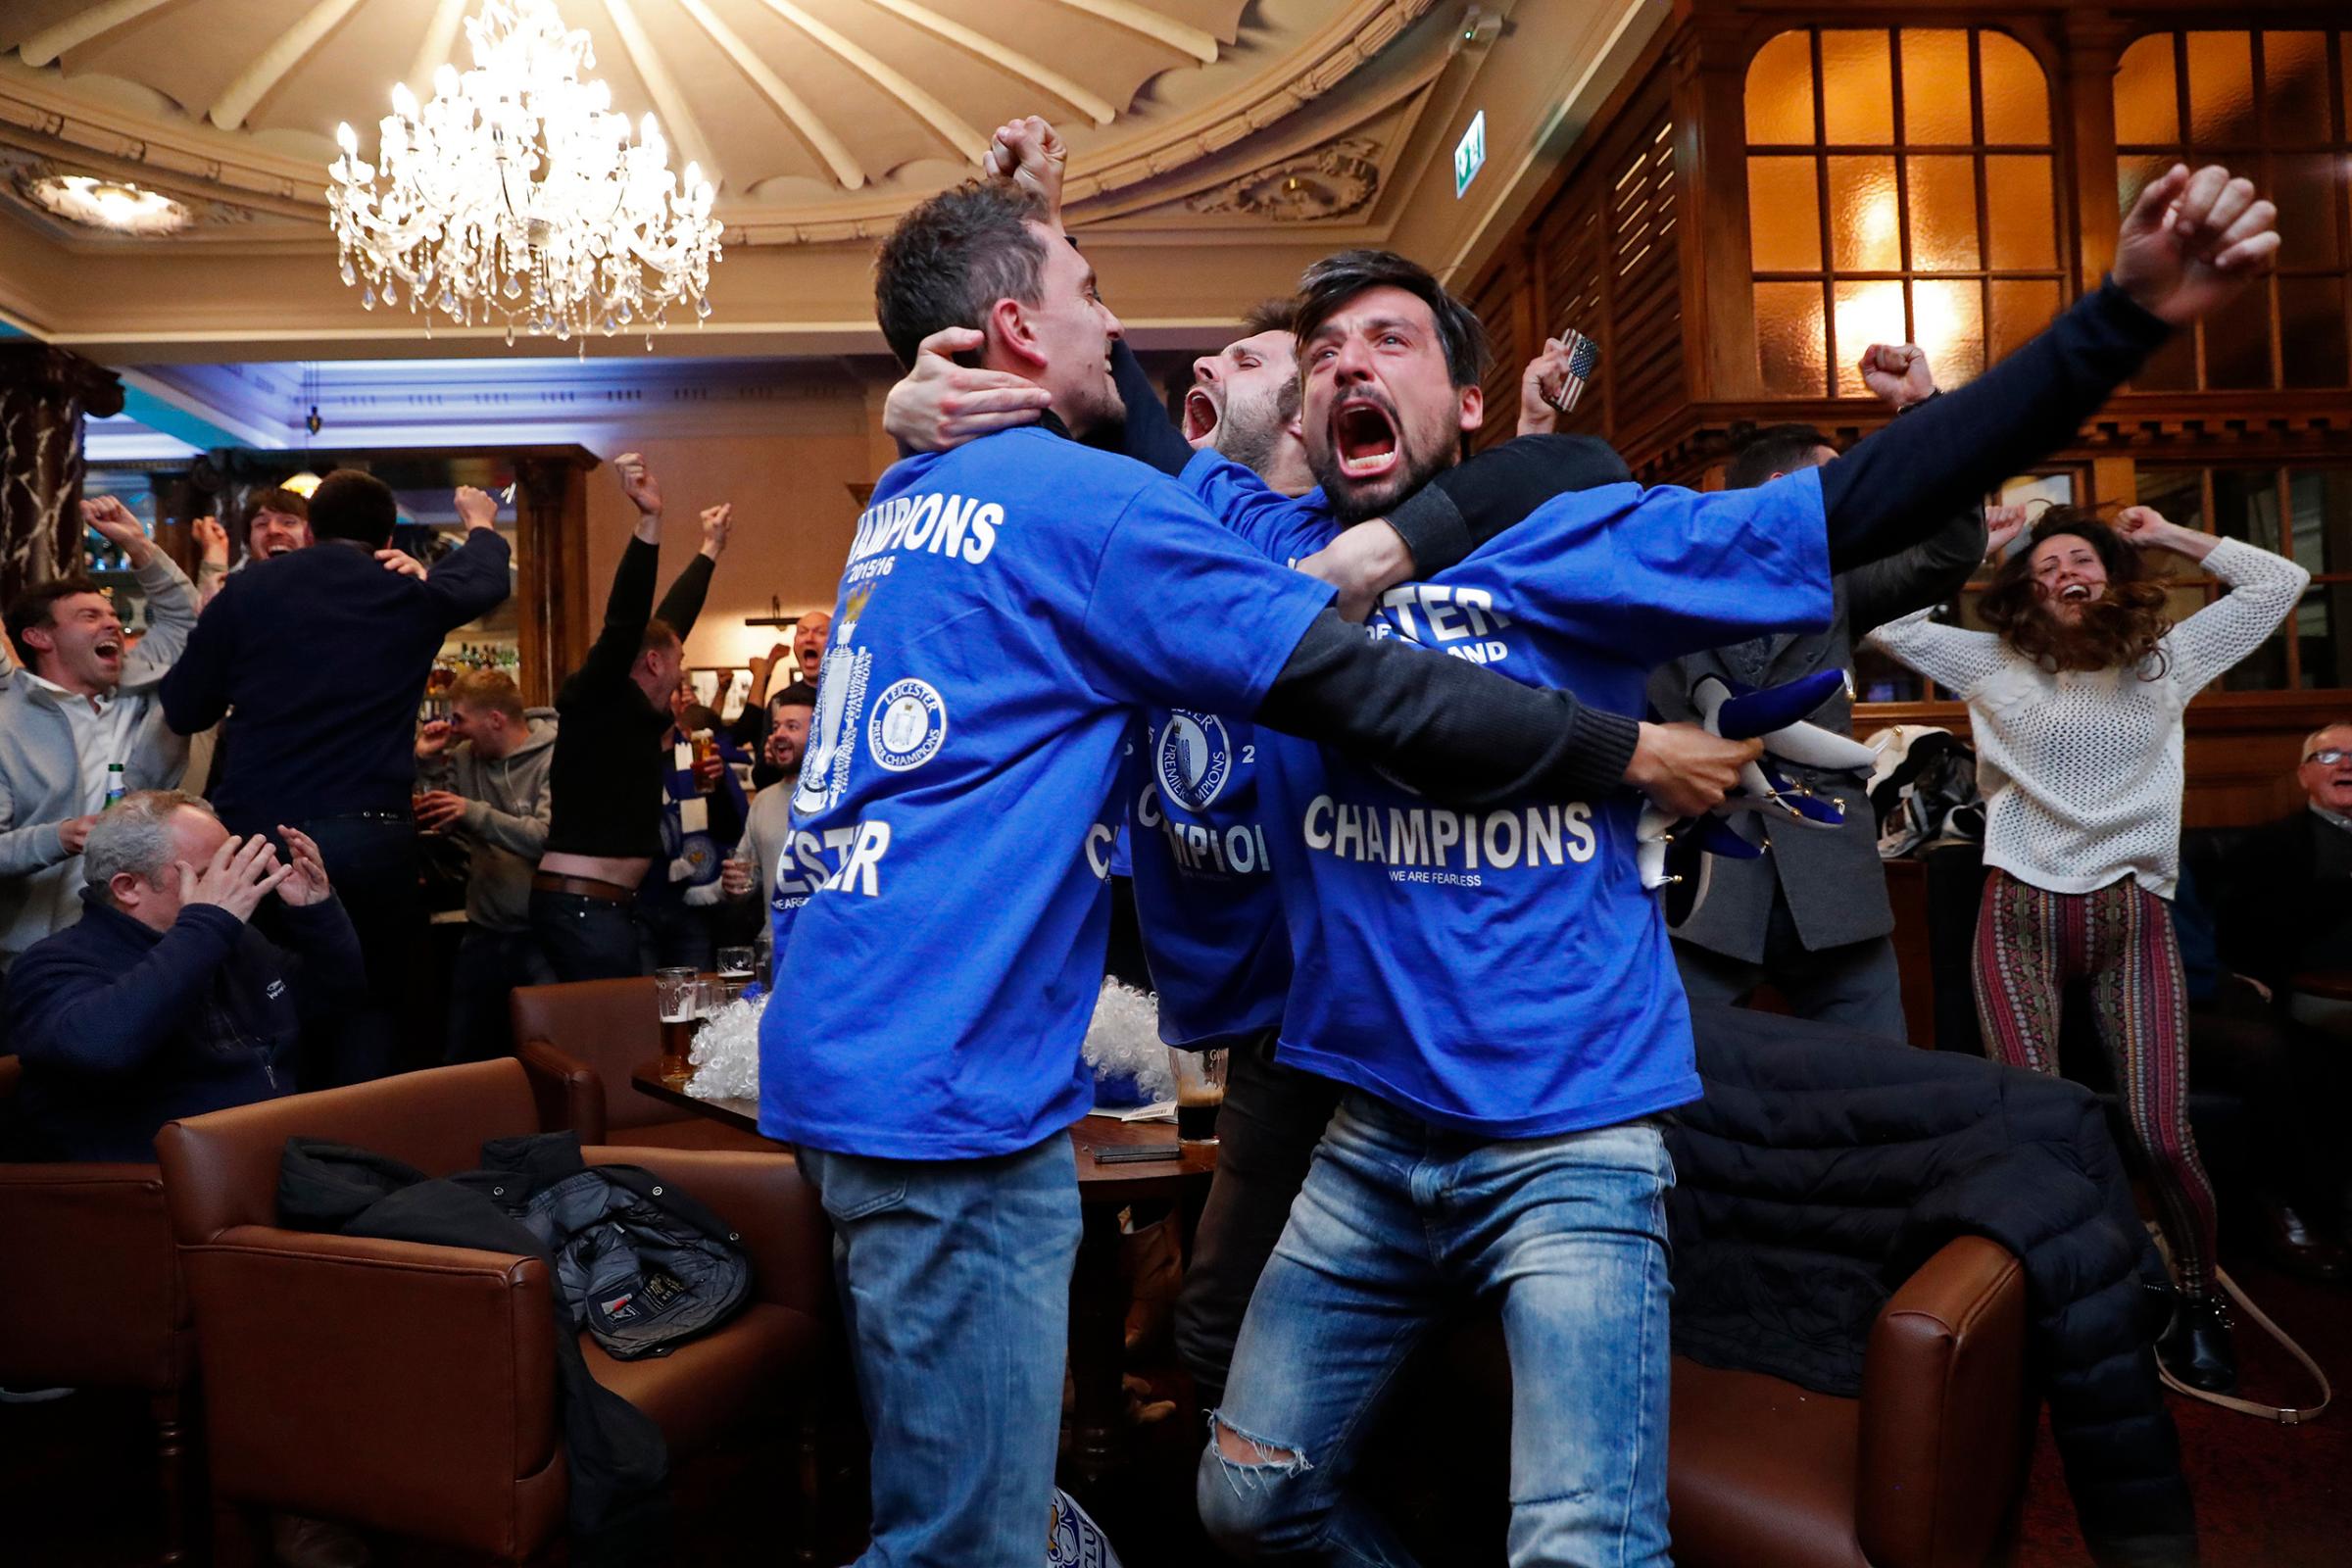 Leicester City fans celebrate after Chelsea's second goal against Tottenham Hotspur at a pub in Leicester, eastern England, May 2, 2016.